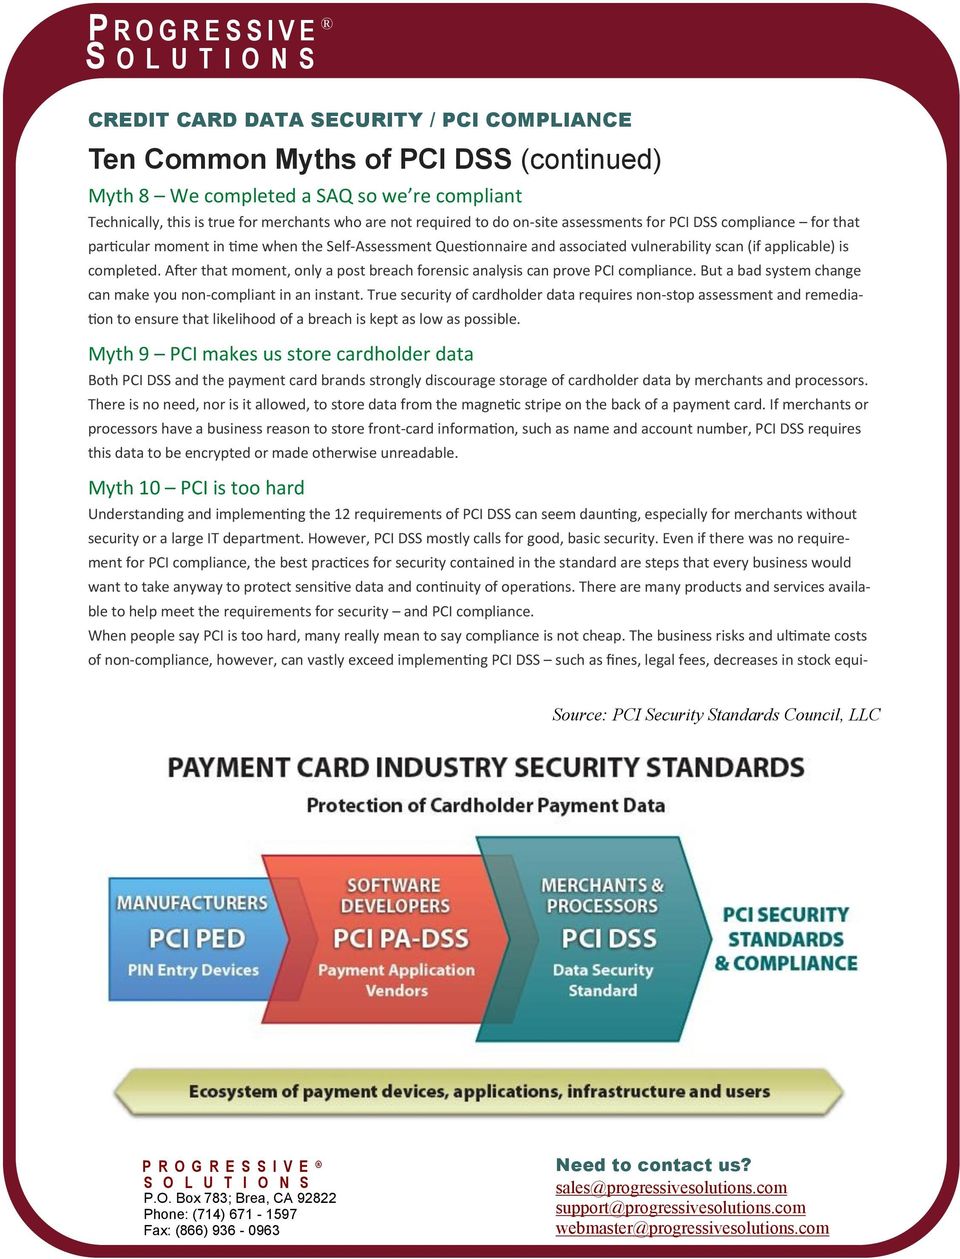 After that moment, only a post breach forensic analysis can prove PCI compliance. But a bad system change can make you non-compliant in an instant.